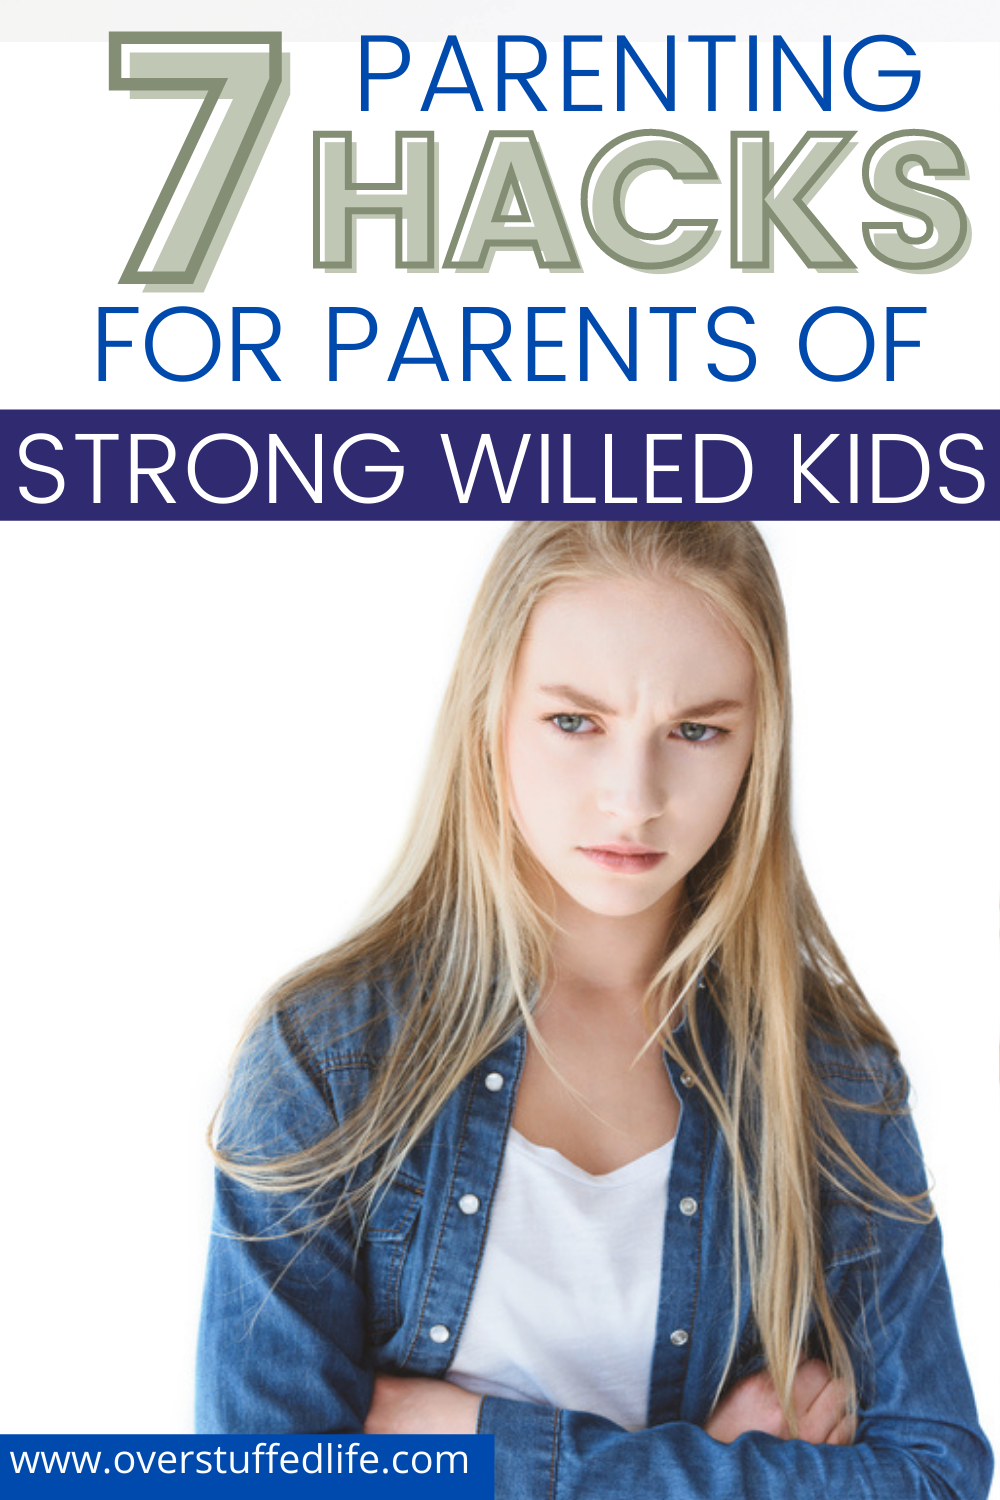 7 Things Your Strong-Willed Child Needs From You via @lara_neves